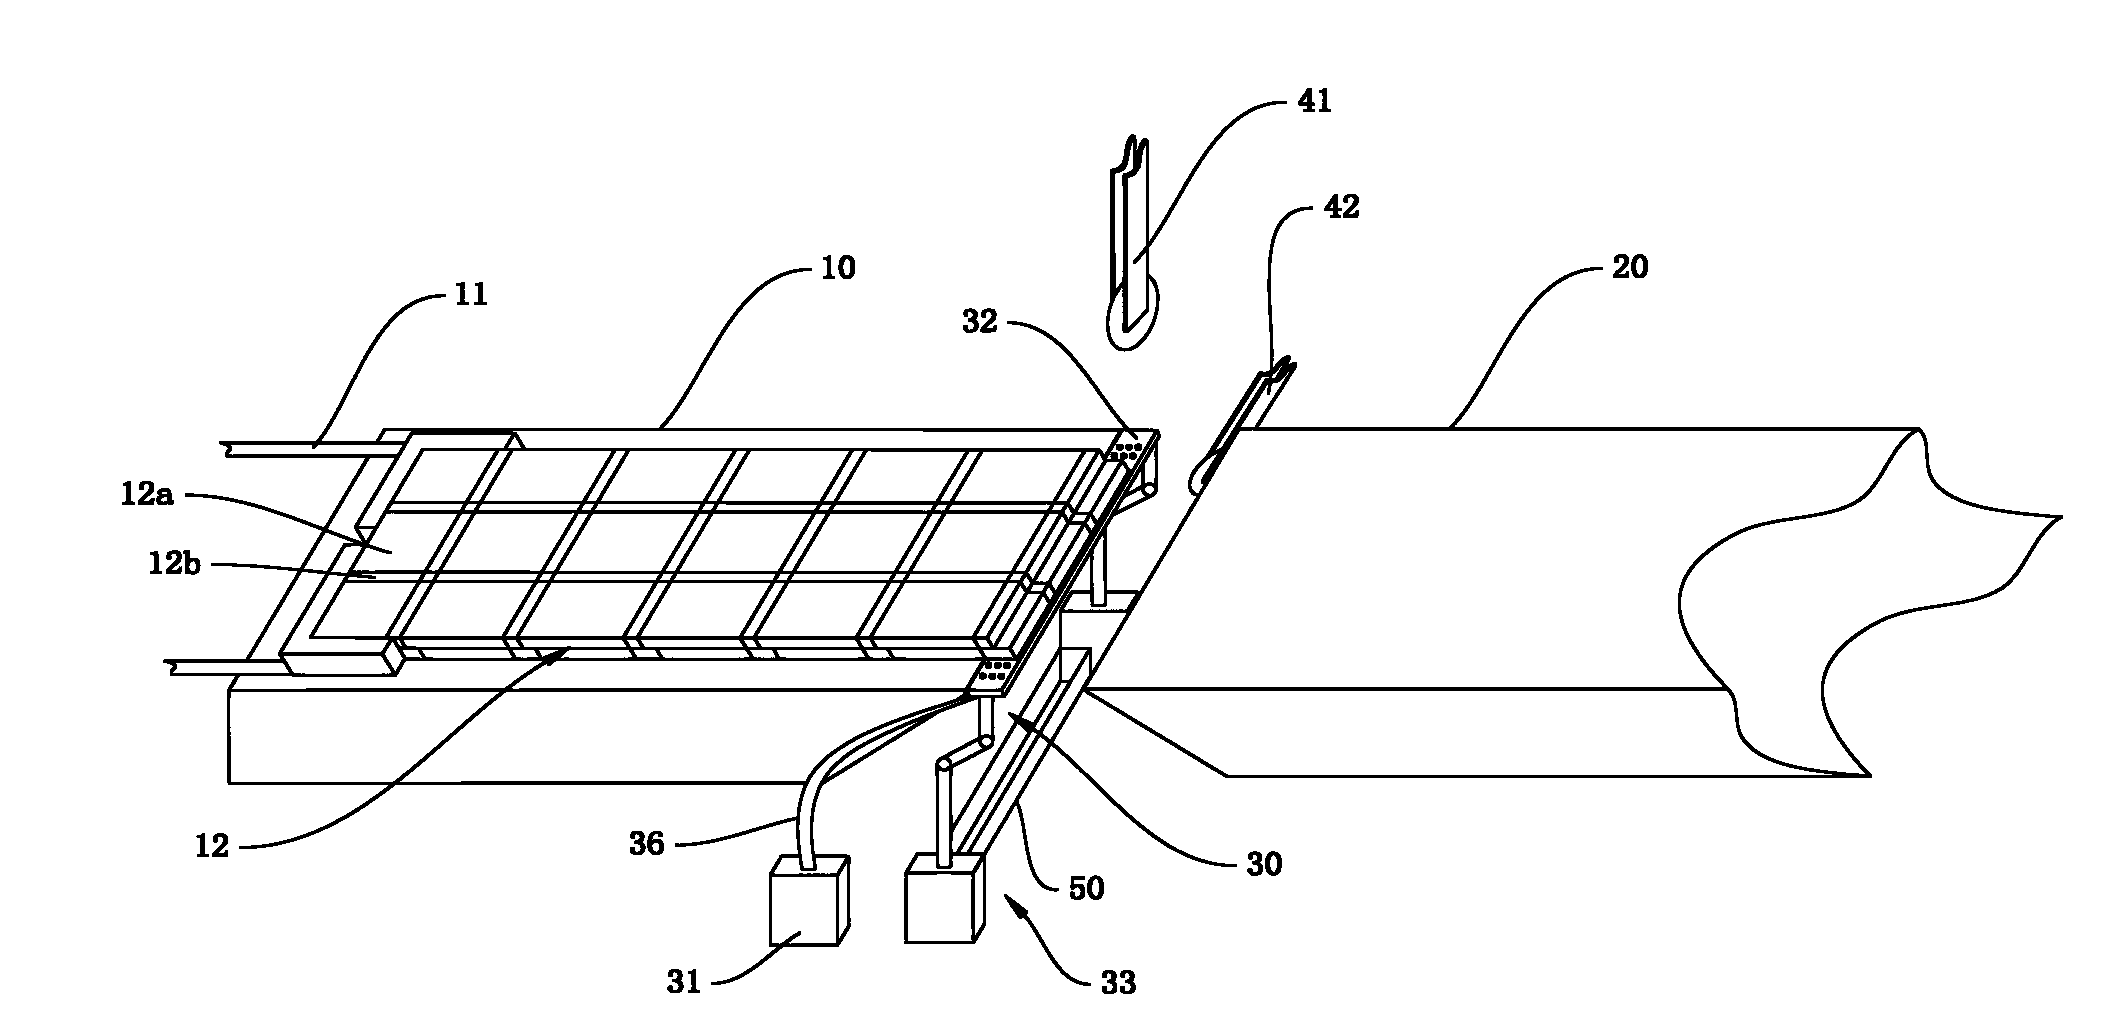 Glass substrate cutting system